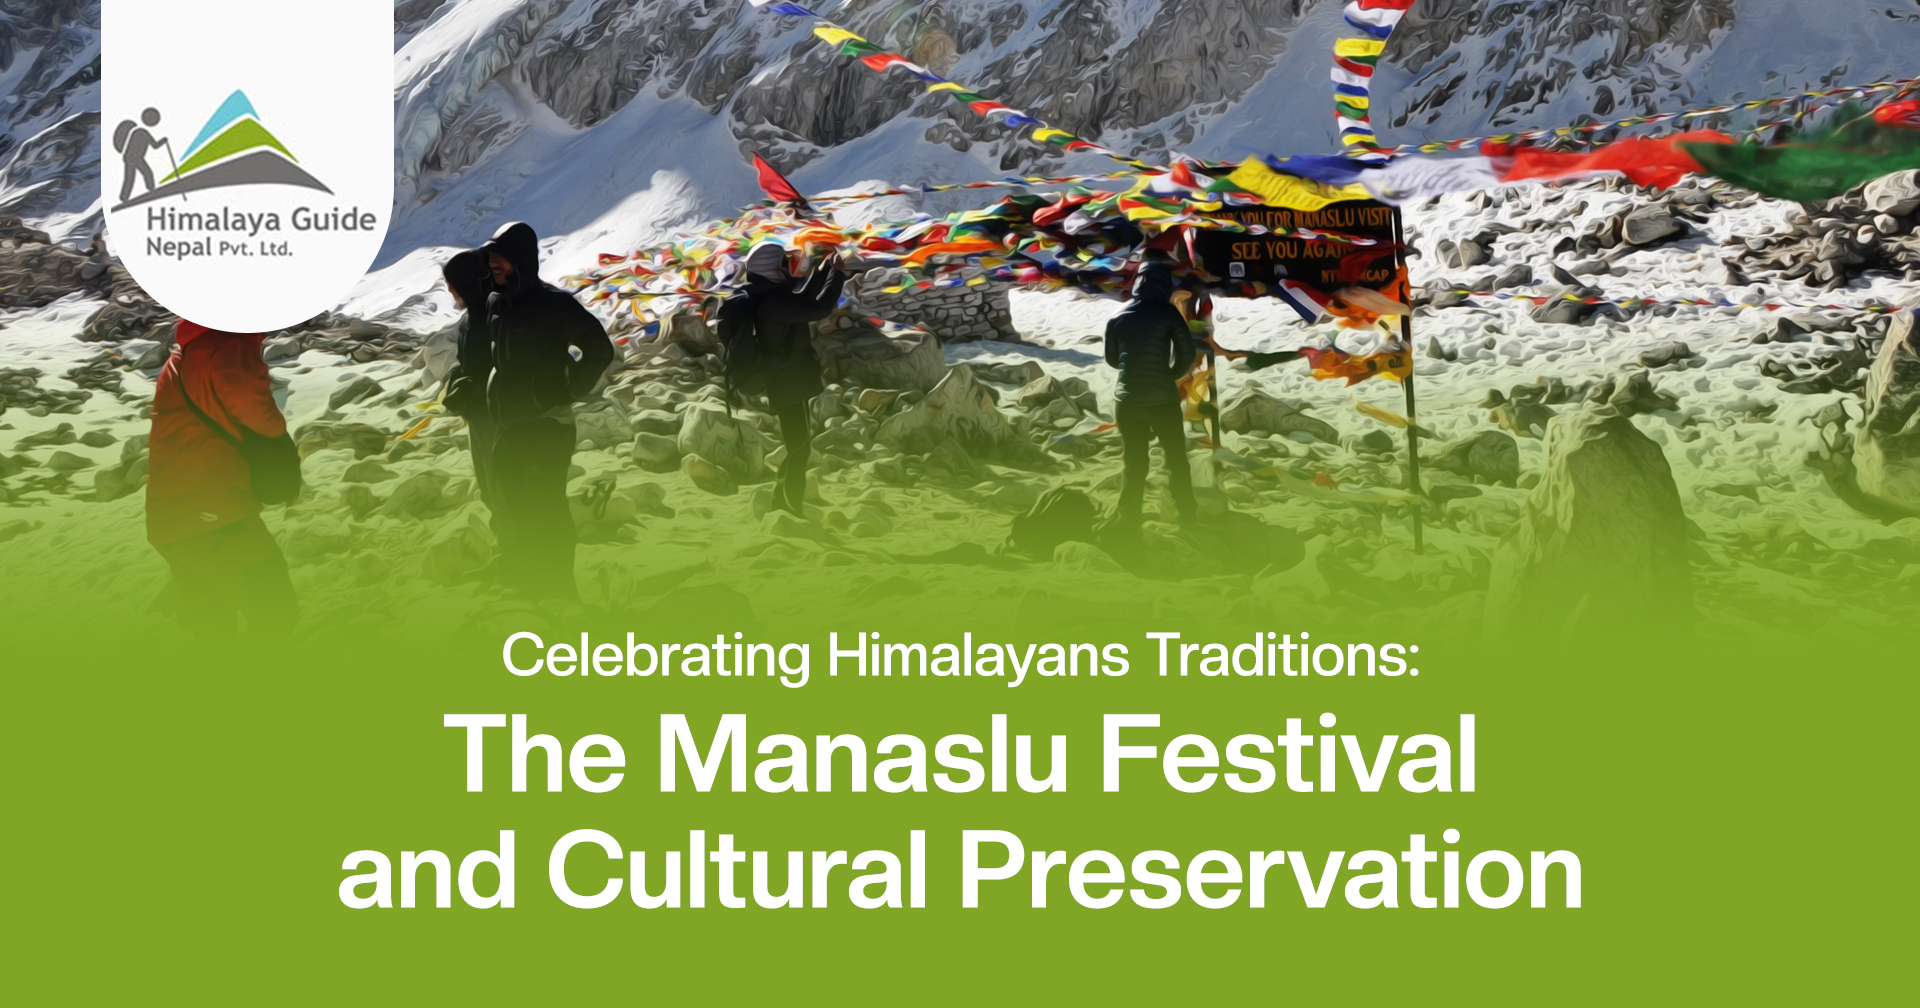 Celebrating Traditions amidst the Himalayas: The Manaslu Festival and Cultural Preservation